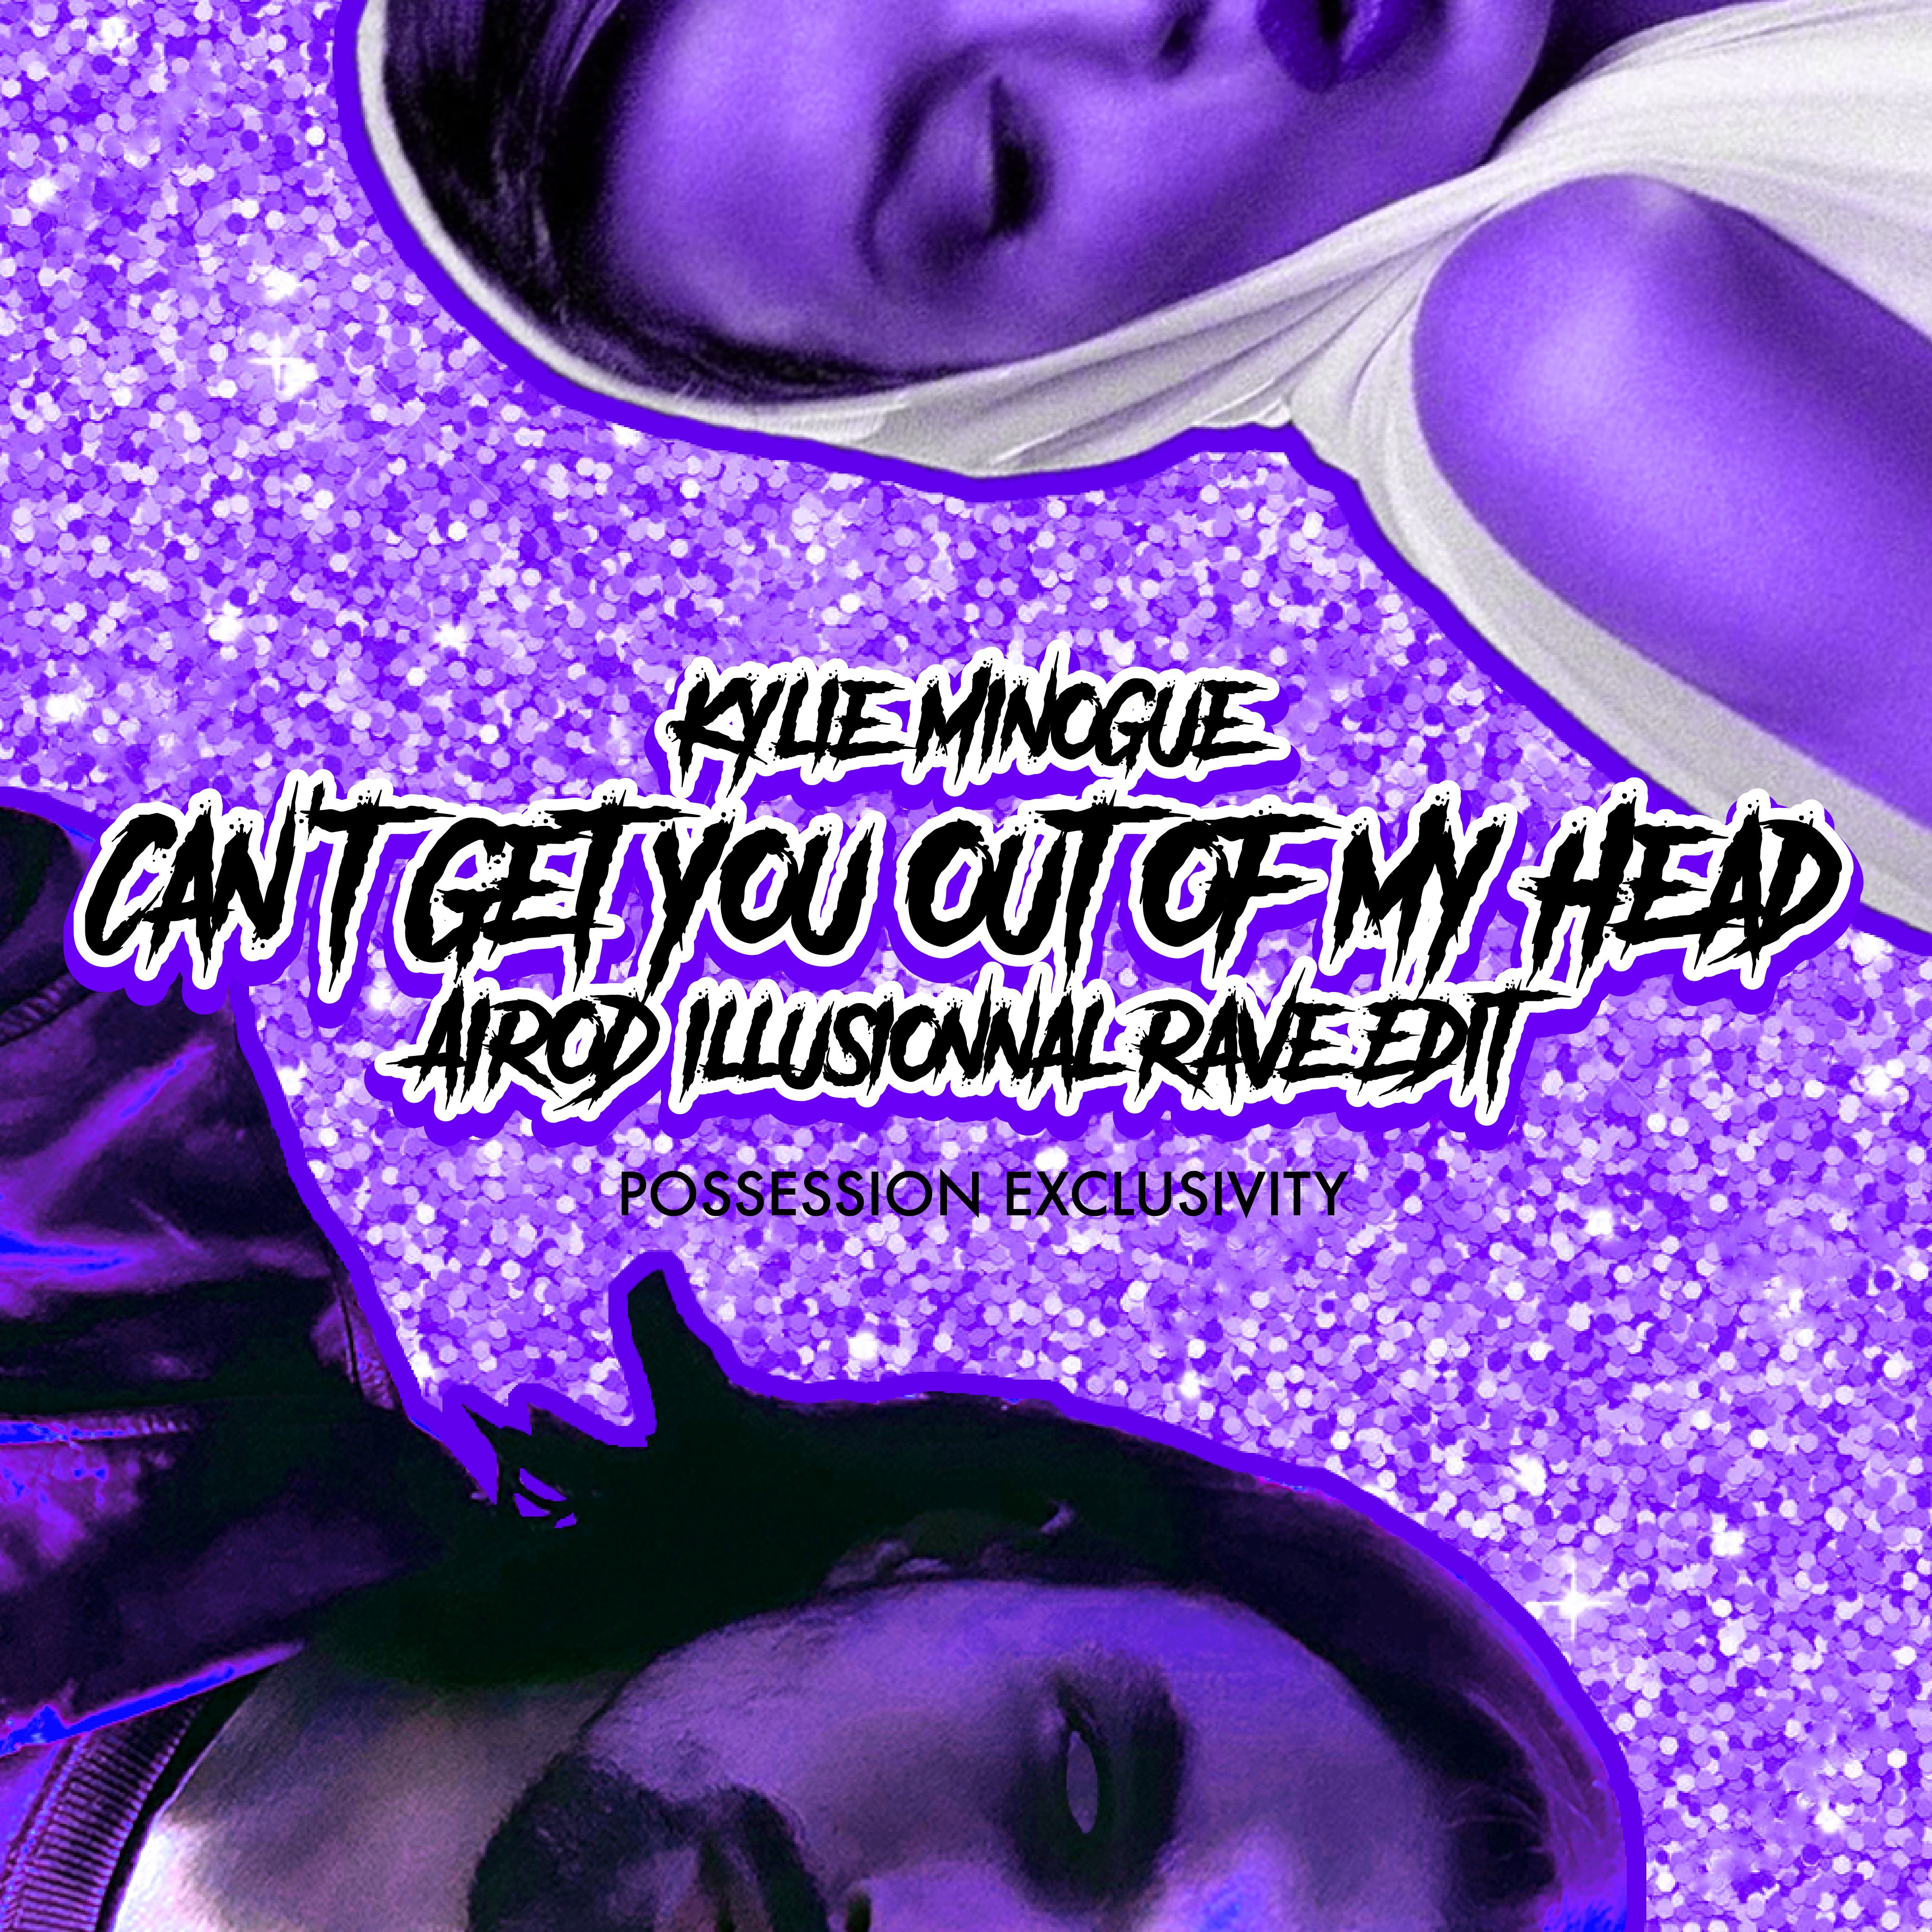 Кэт дженис dance you outta my. Kylie Minogue can`t get you out. Kylie Minogue tears on my Pillow. Kylie Minogue can't get you out of my head. Hard Techno Rave.